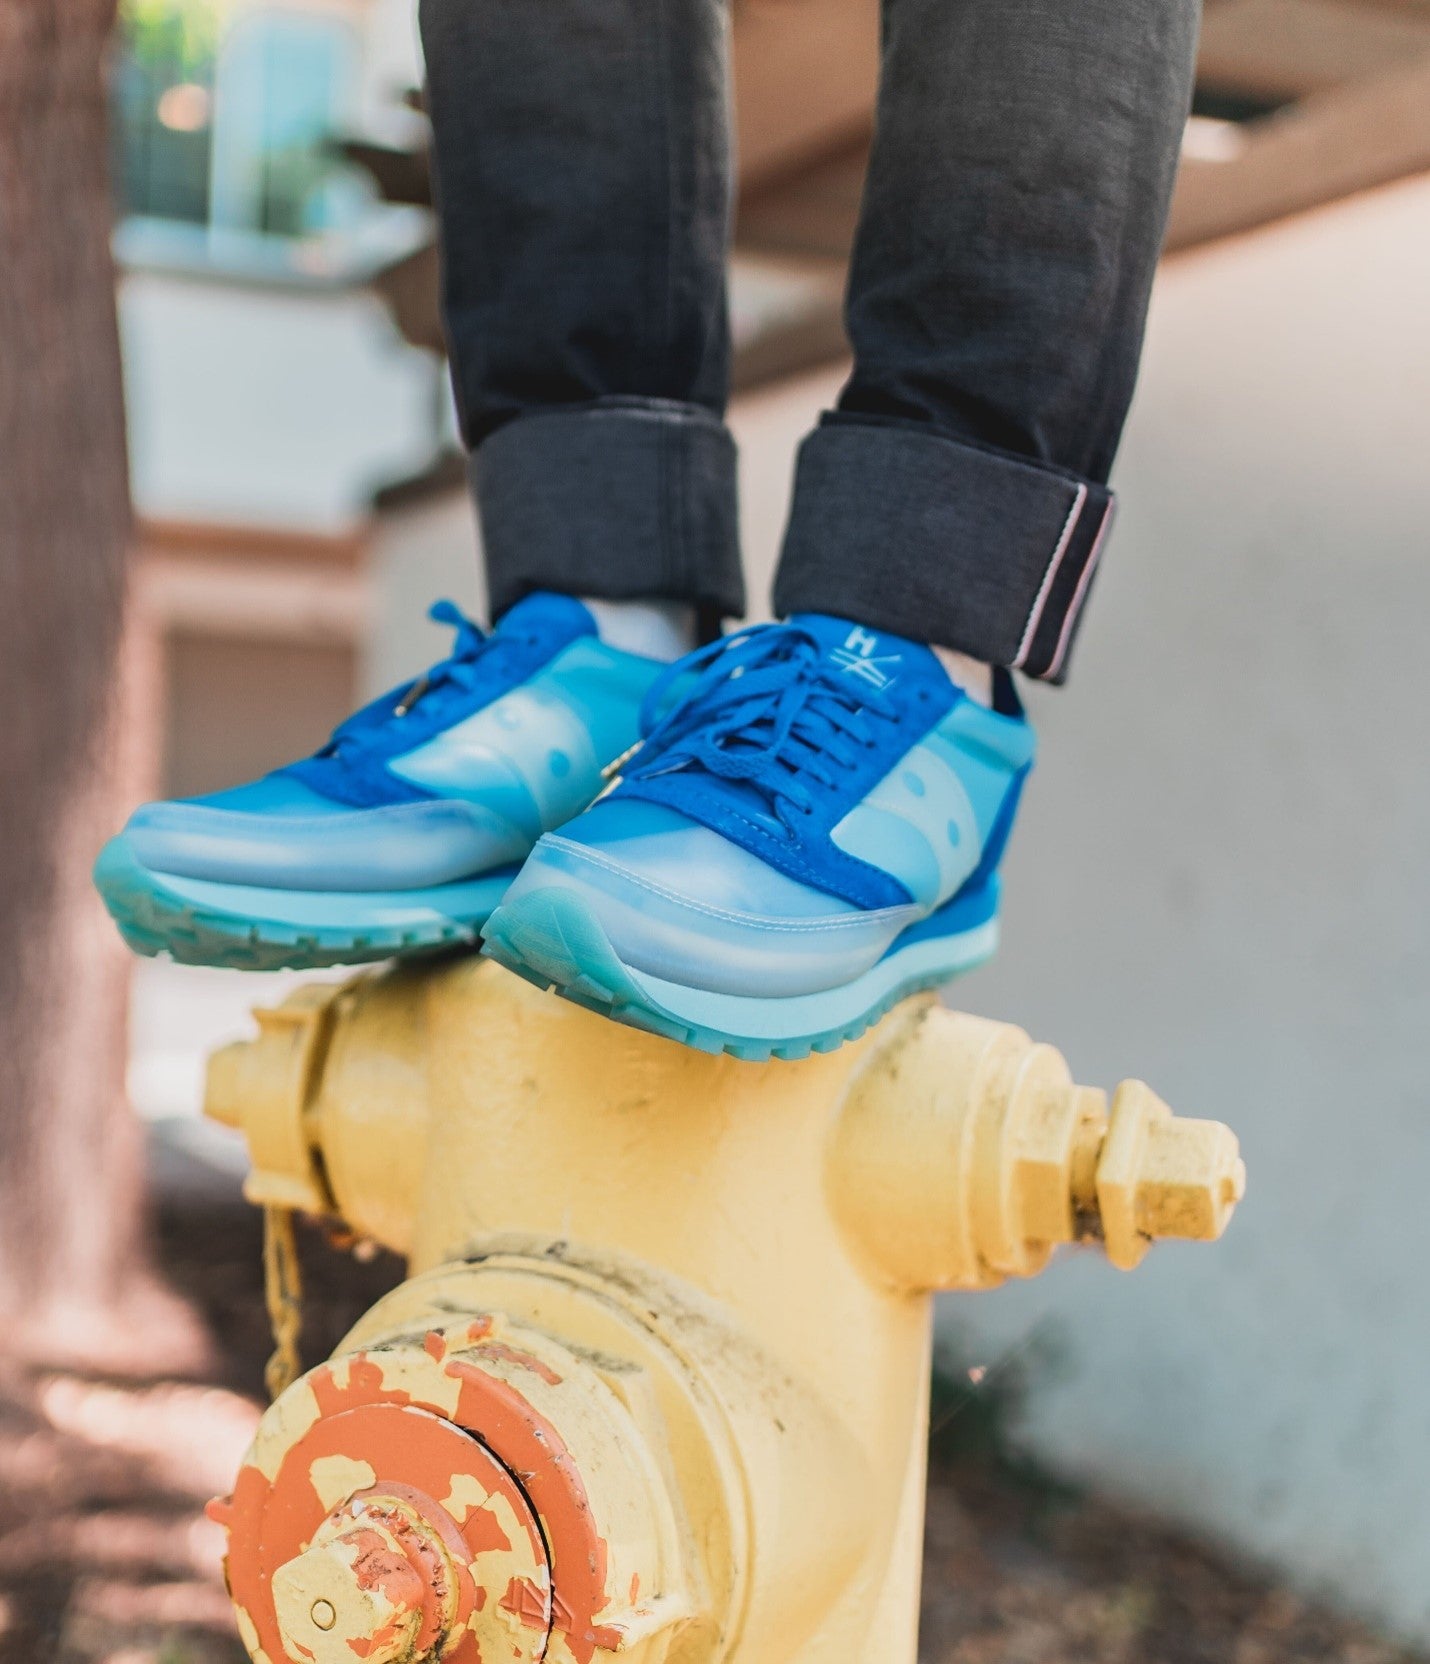 A person standing on a yellow fire hydrant wearing a pair of blue sneakers